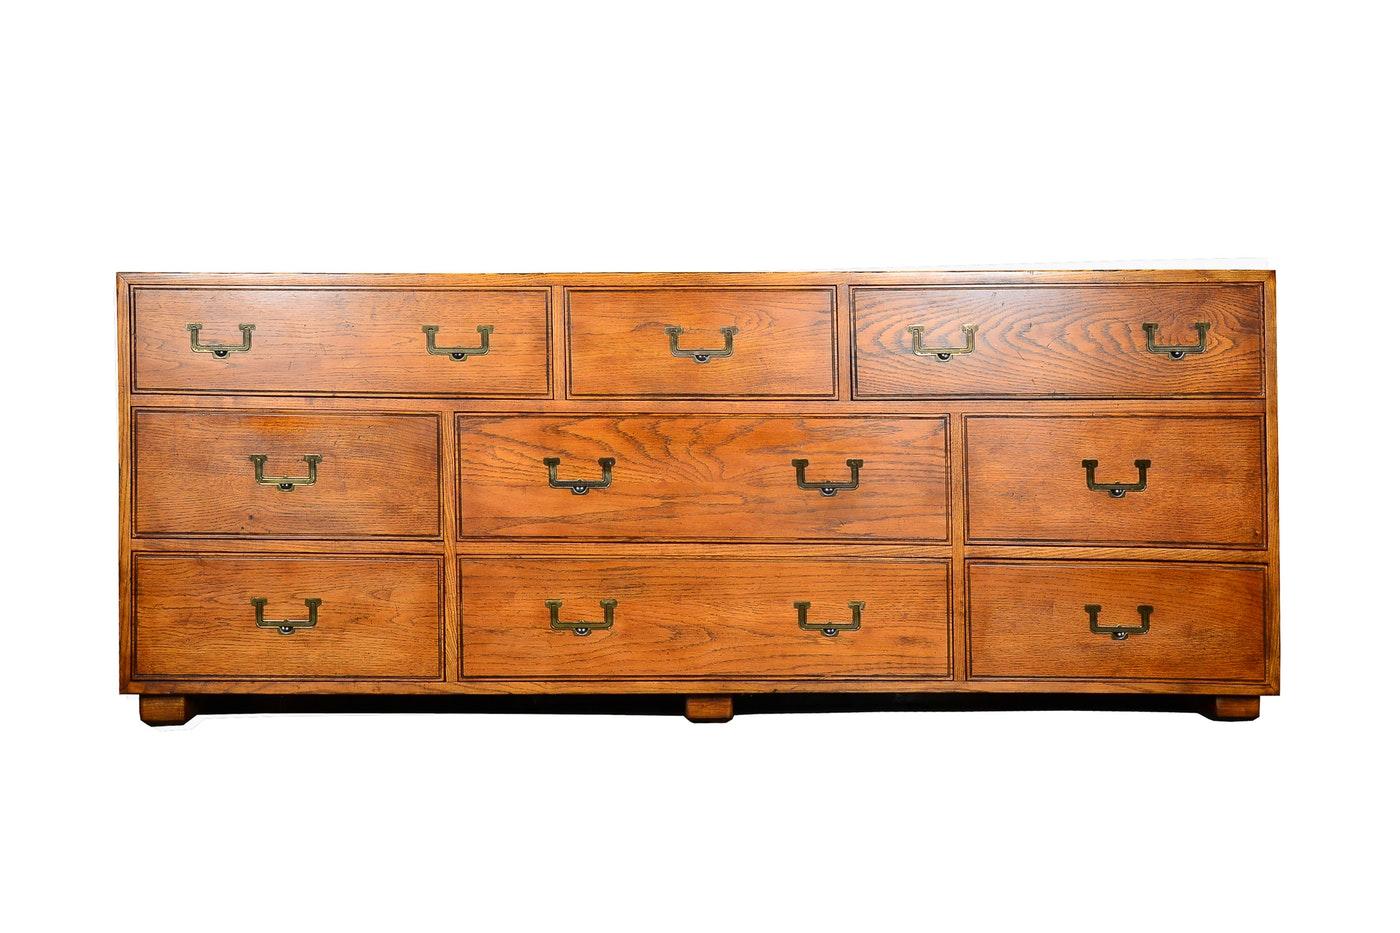 A beautiful oak Campaign style dresser by Henredon as part of their Artefacts collection. It features nine dovetailed drawers, original brass hardware, recessed handles and a divided centre drawer. Great construction and style.